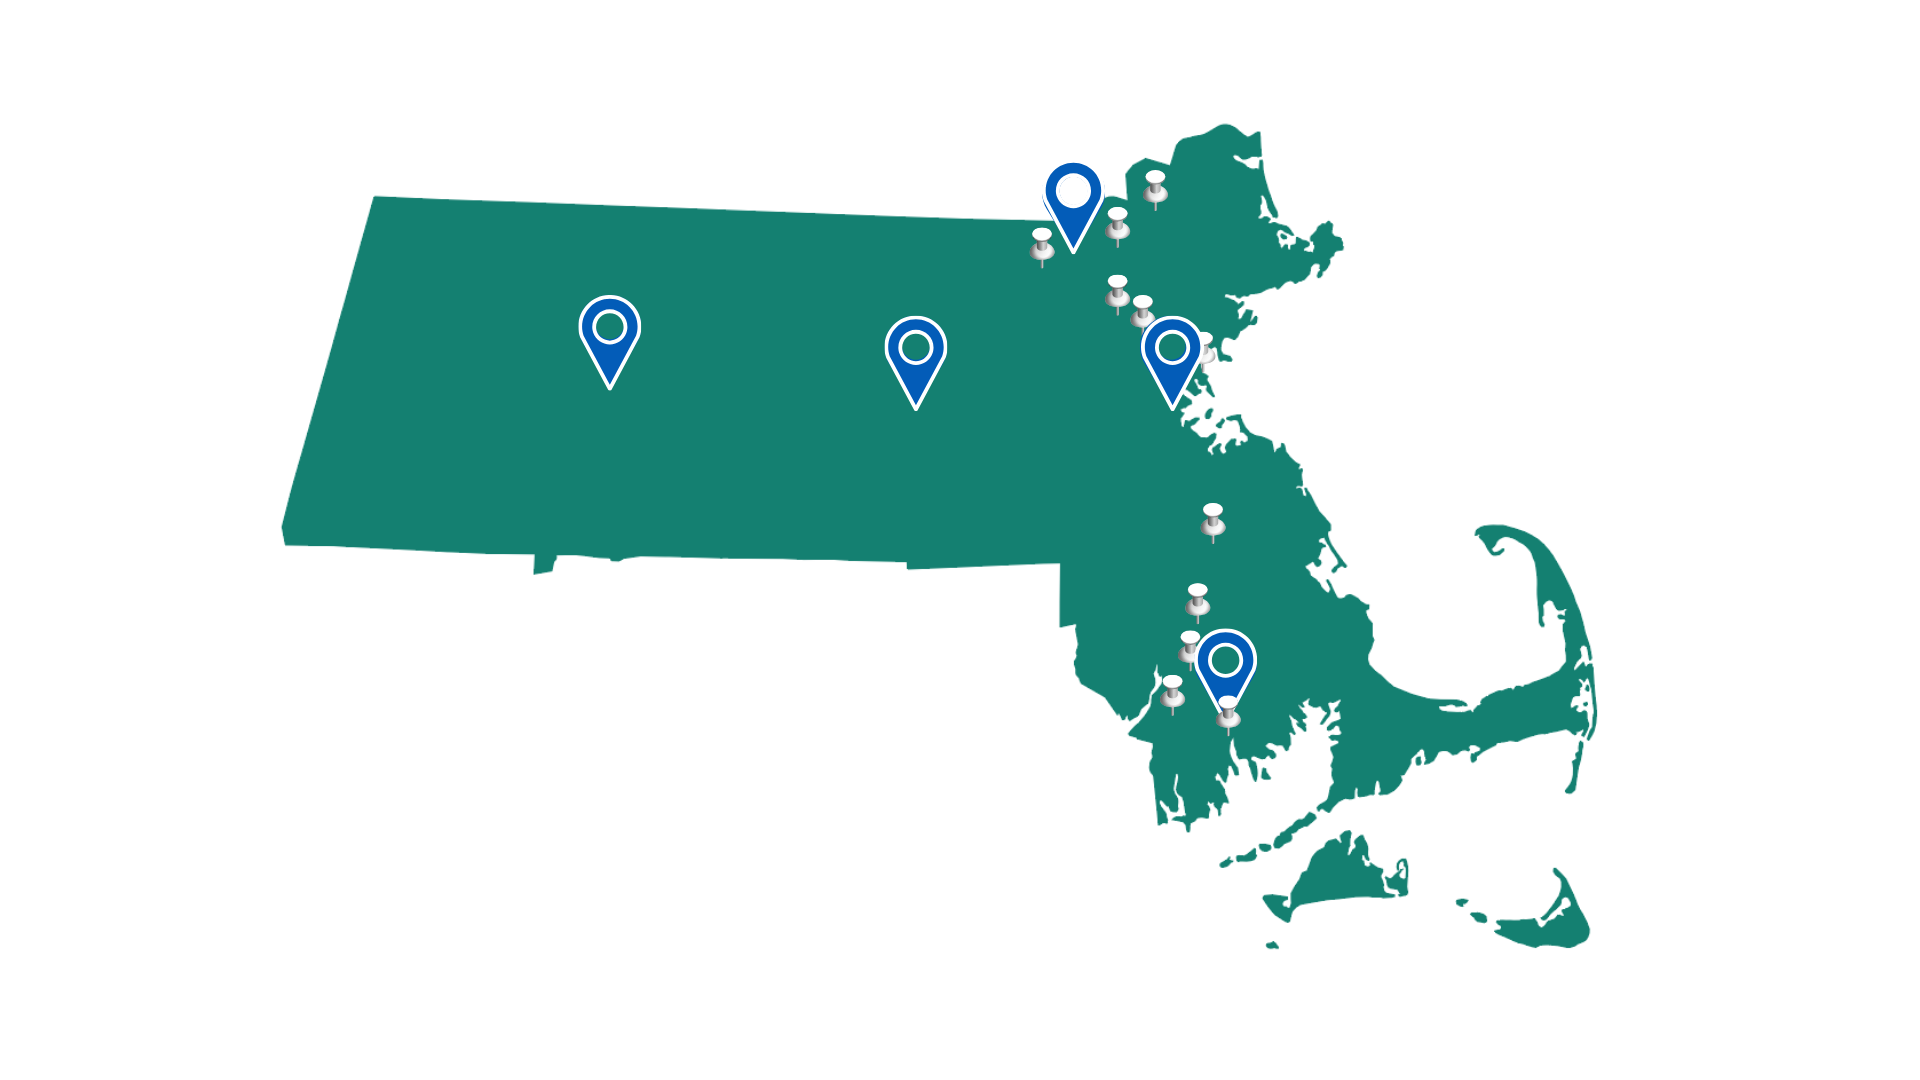 Pins on Map of Massachusetts show the locations of UMass campuses and early college partner high schools. 